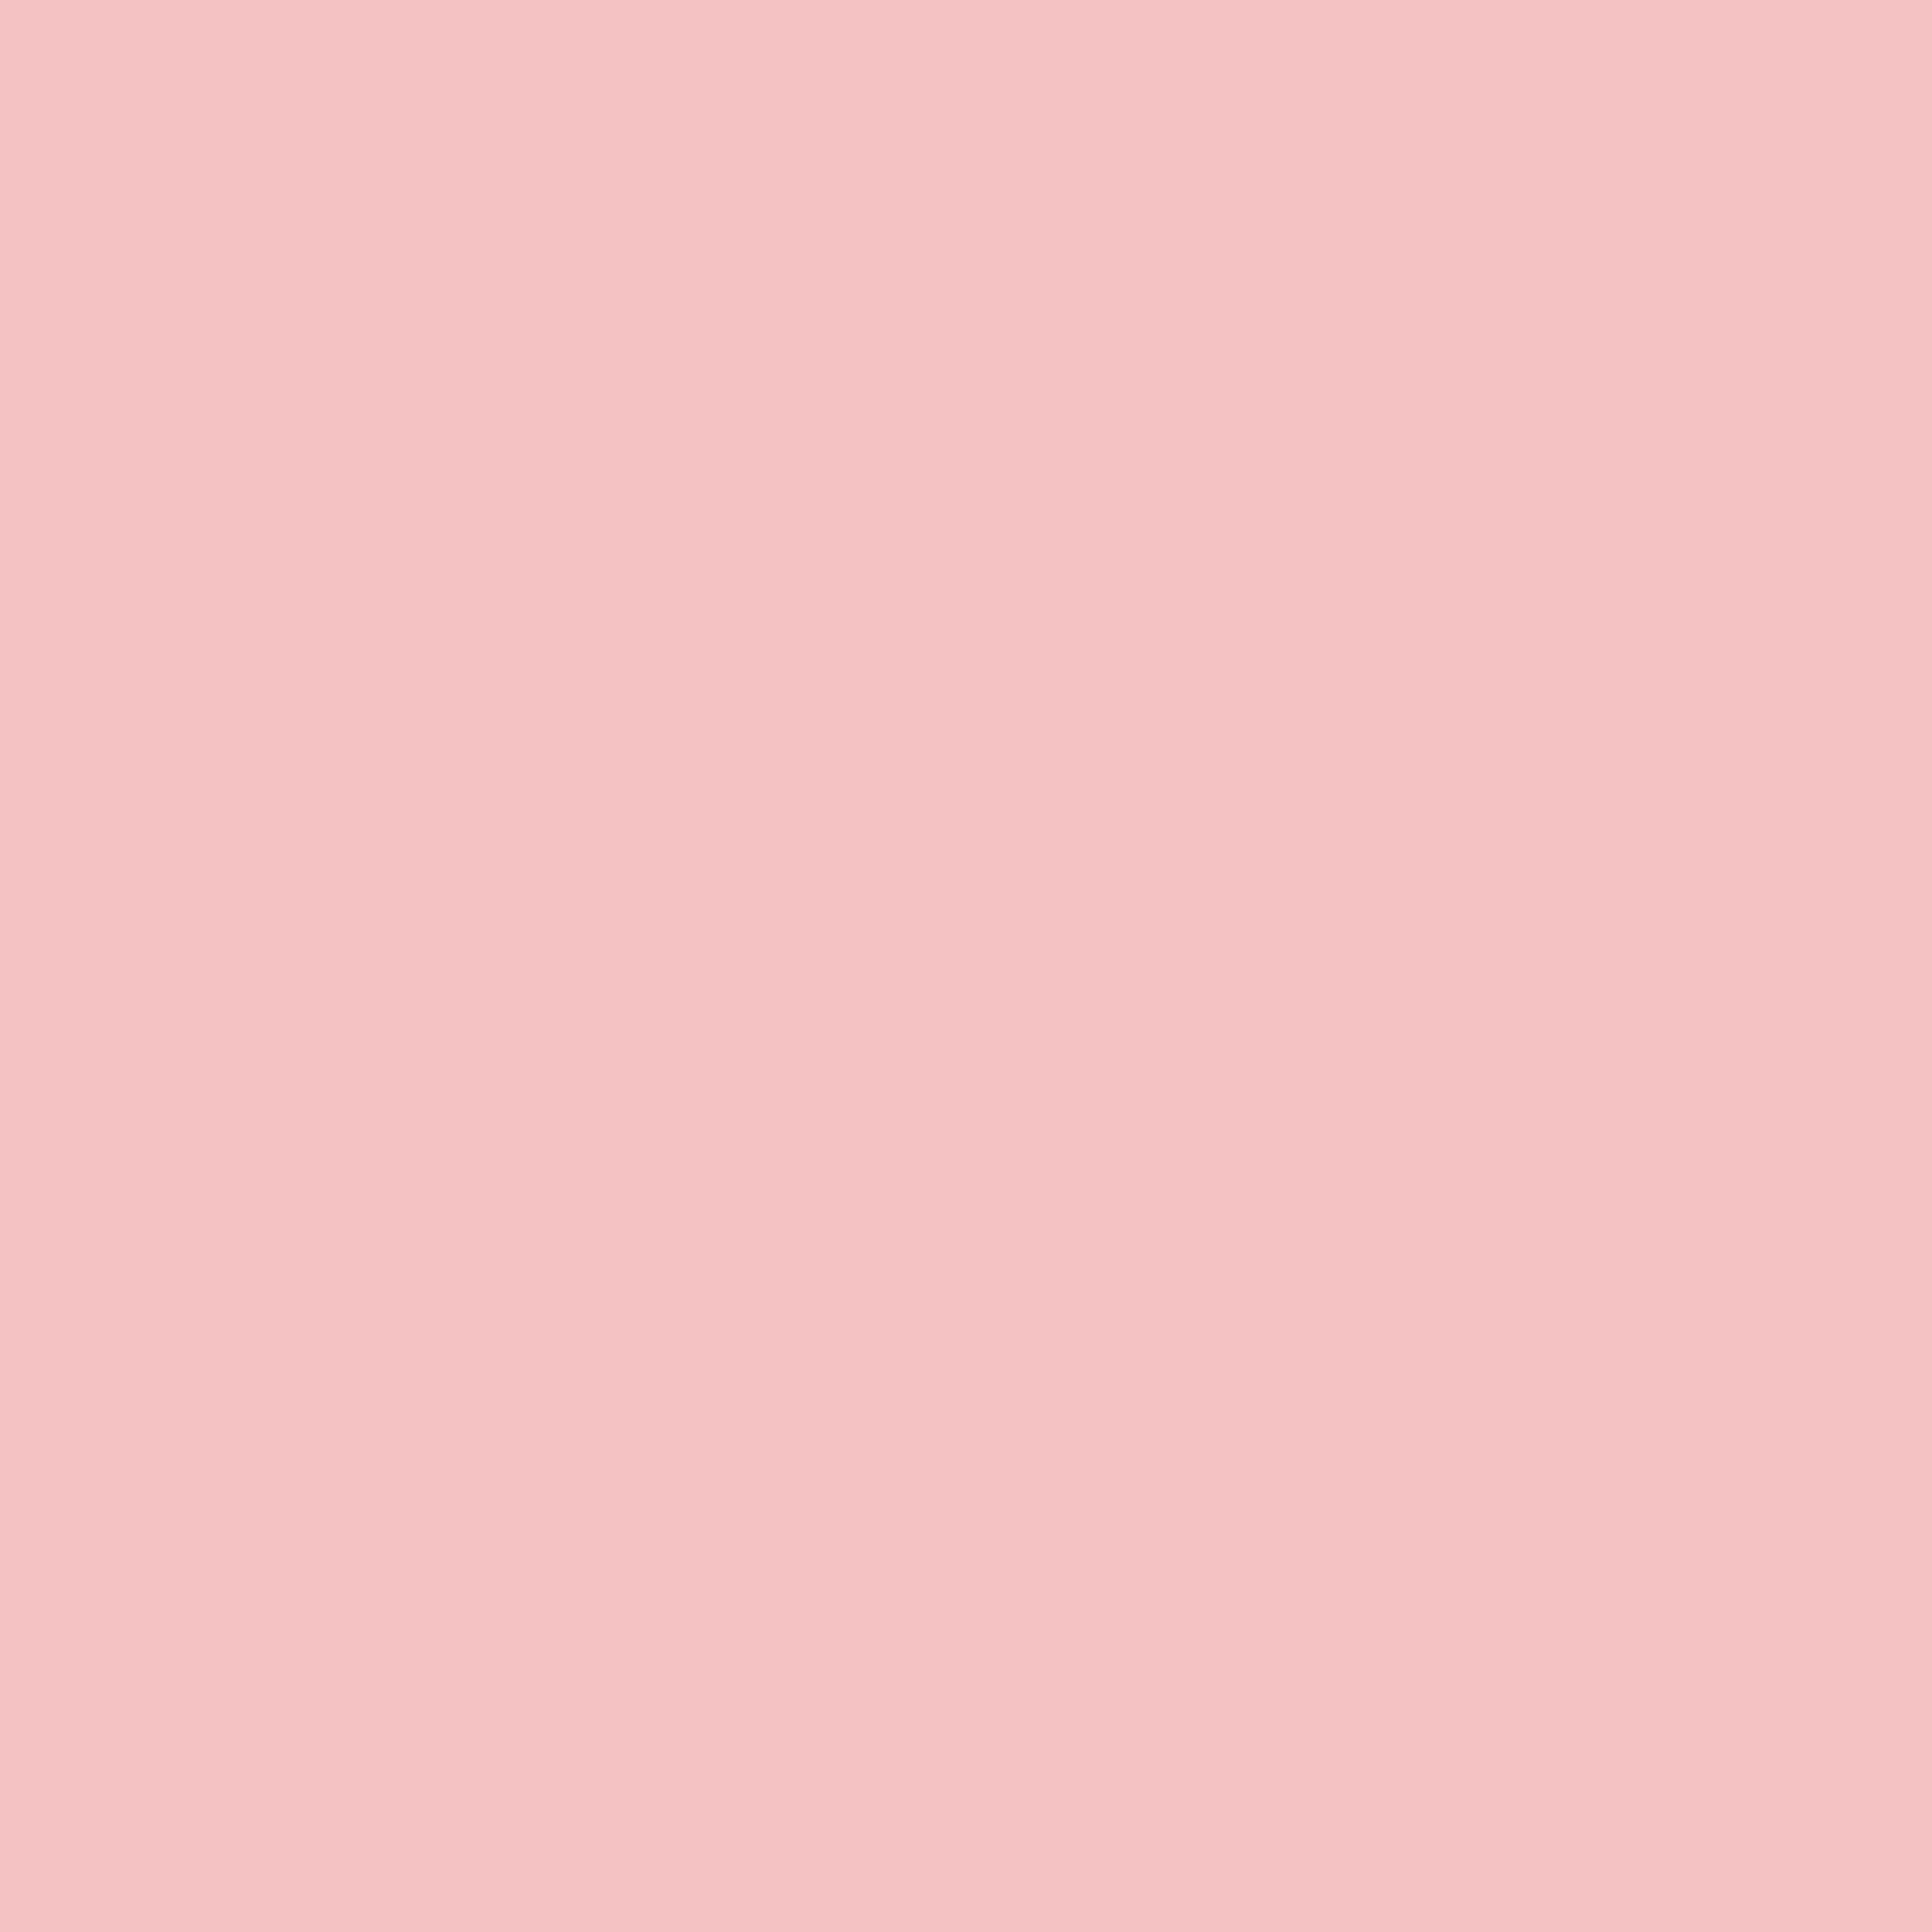 2732x2732 Baby Pink Solid Color Background